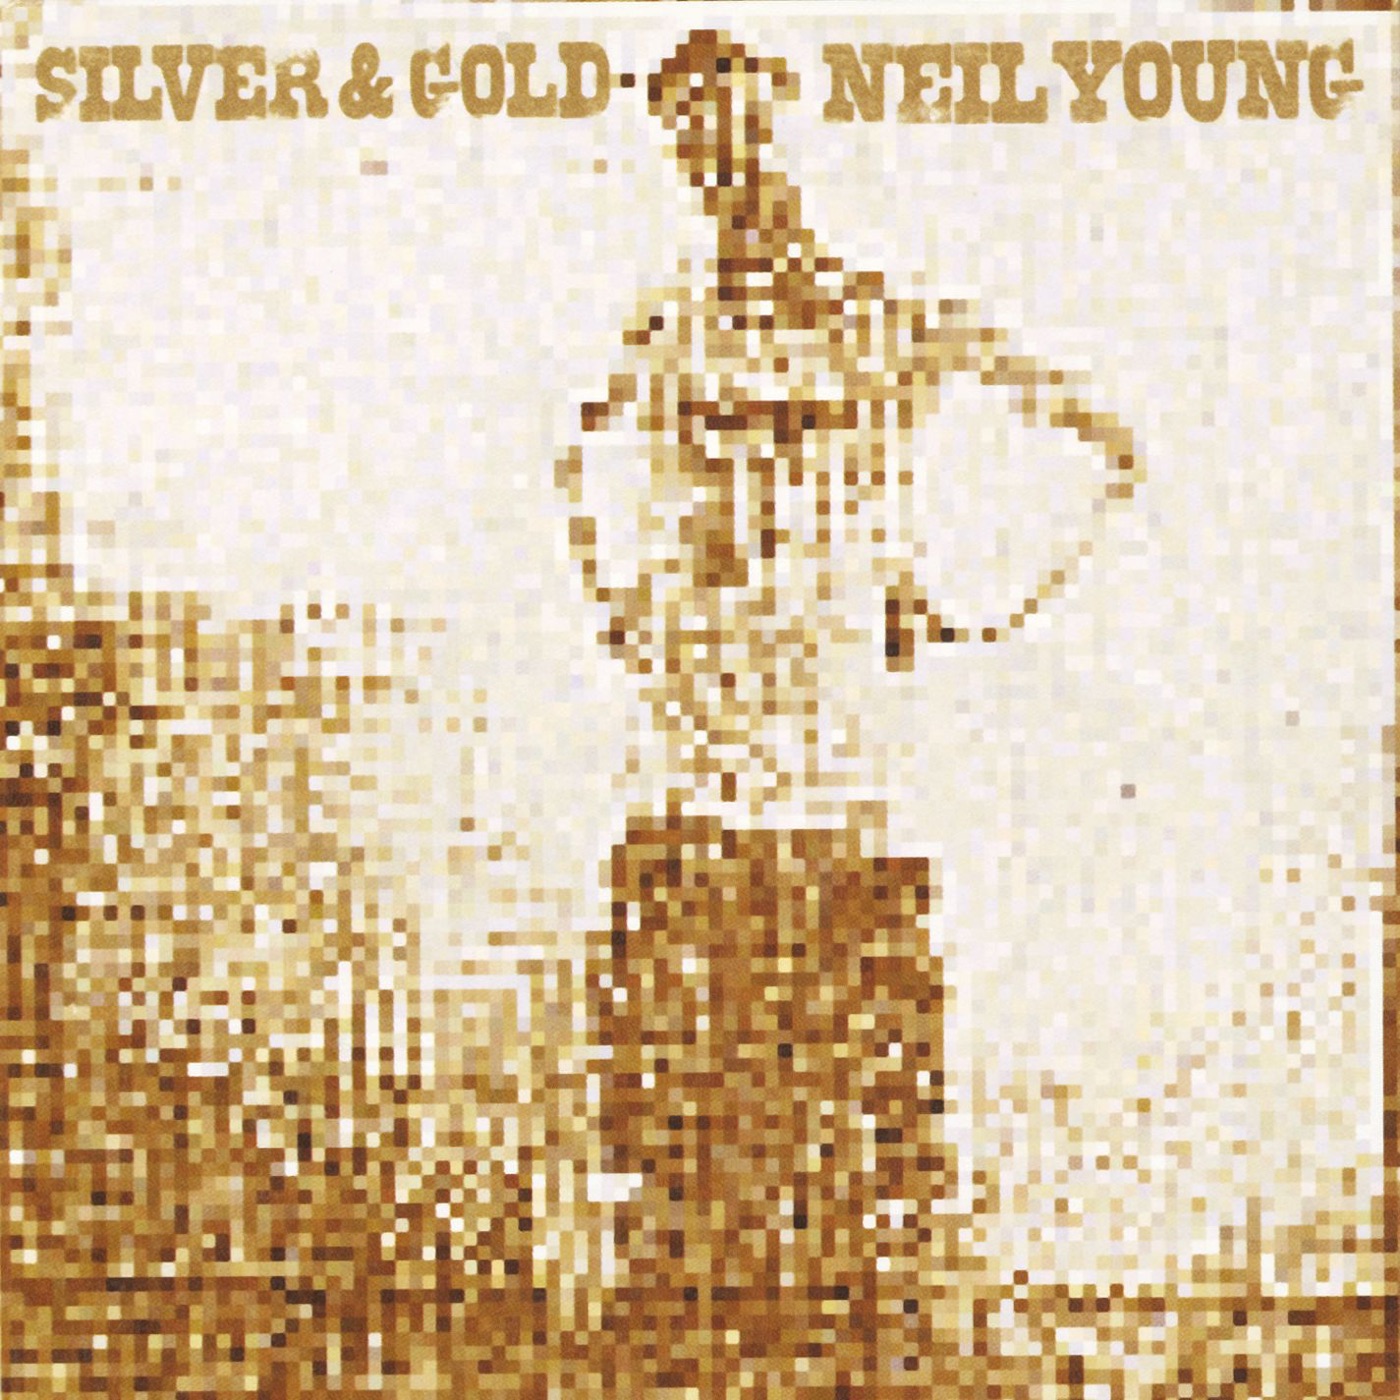 Silver & Gold by Neil Young